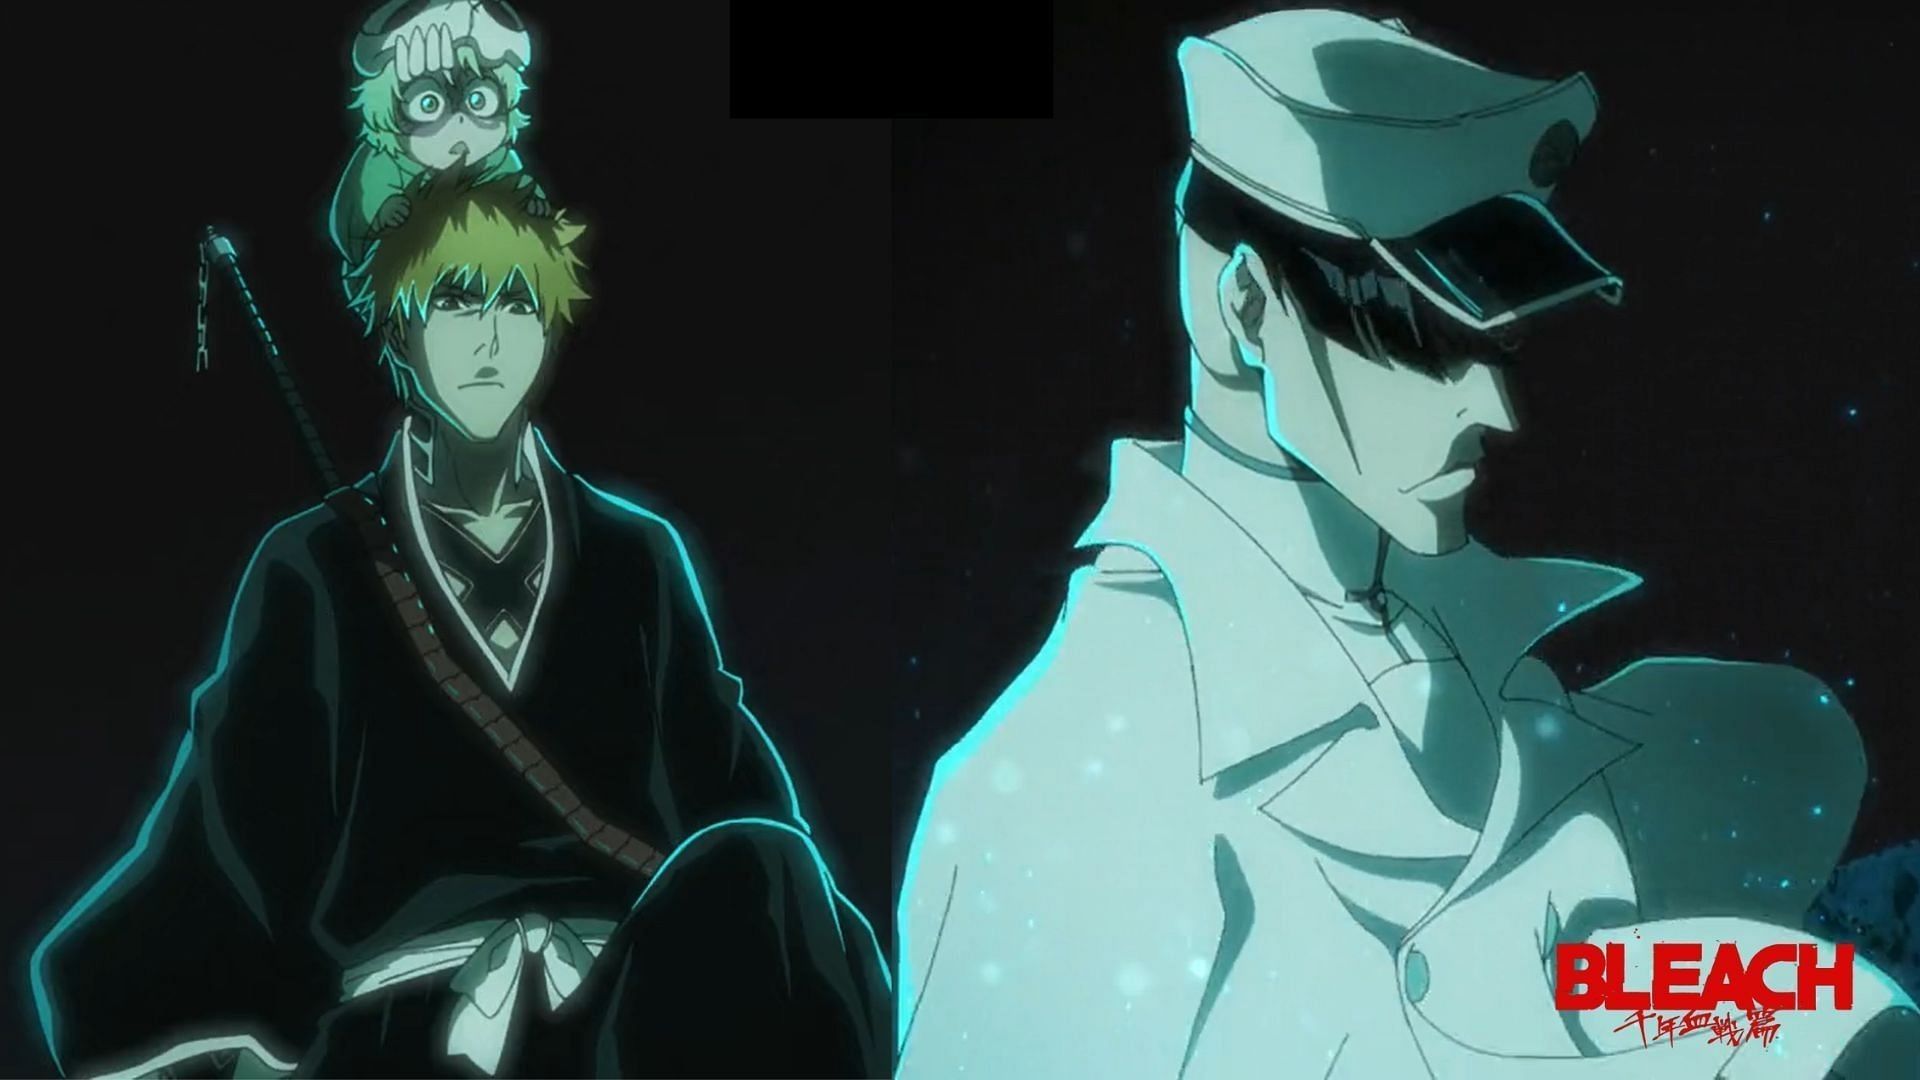 Bleach: TYBW episode 3 causes concern about declining animation quality amid plot-heavy scenes